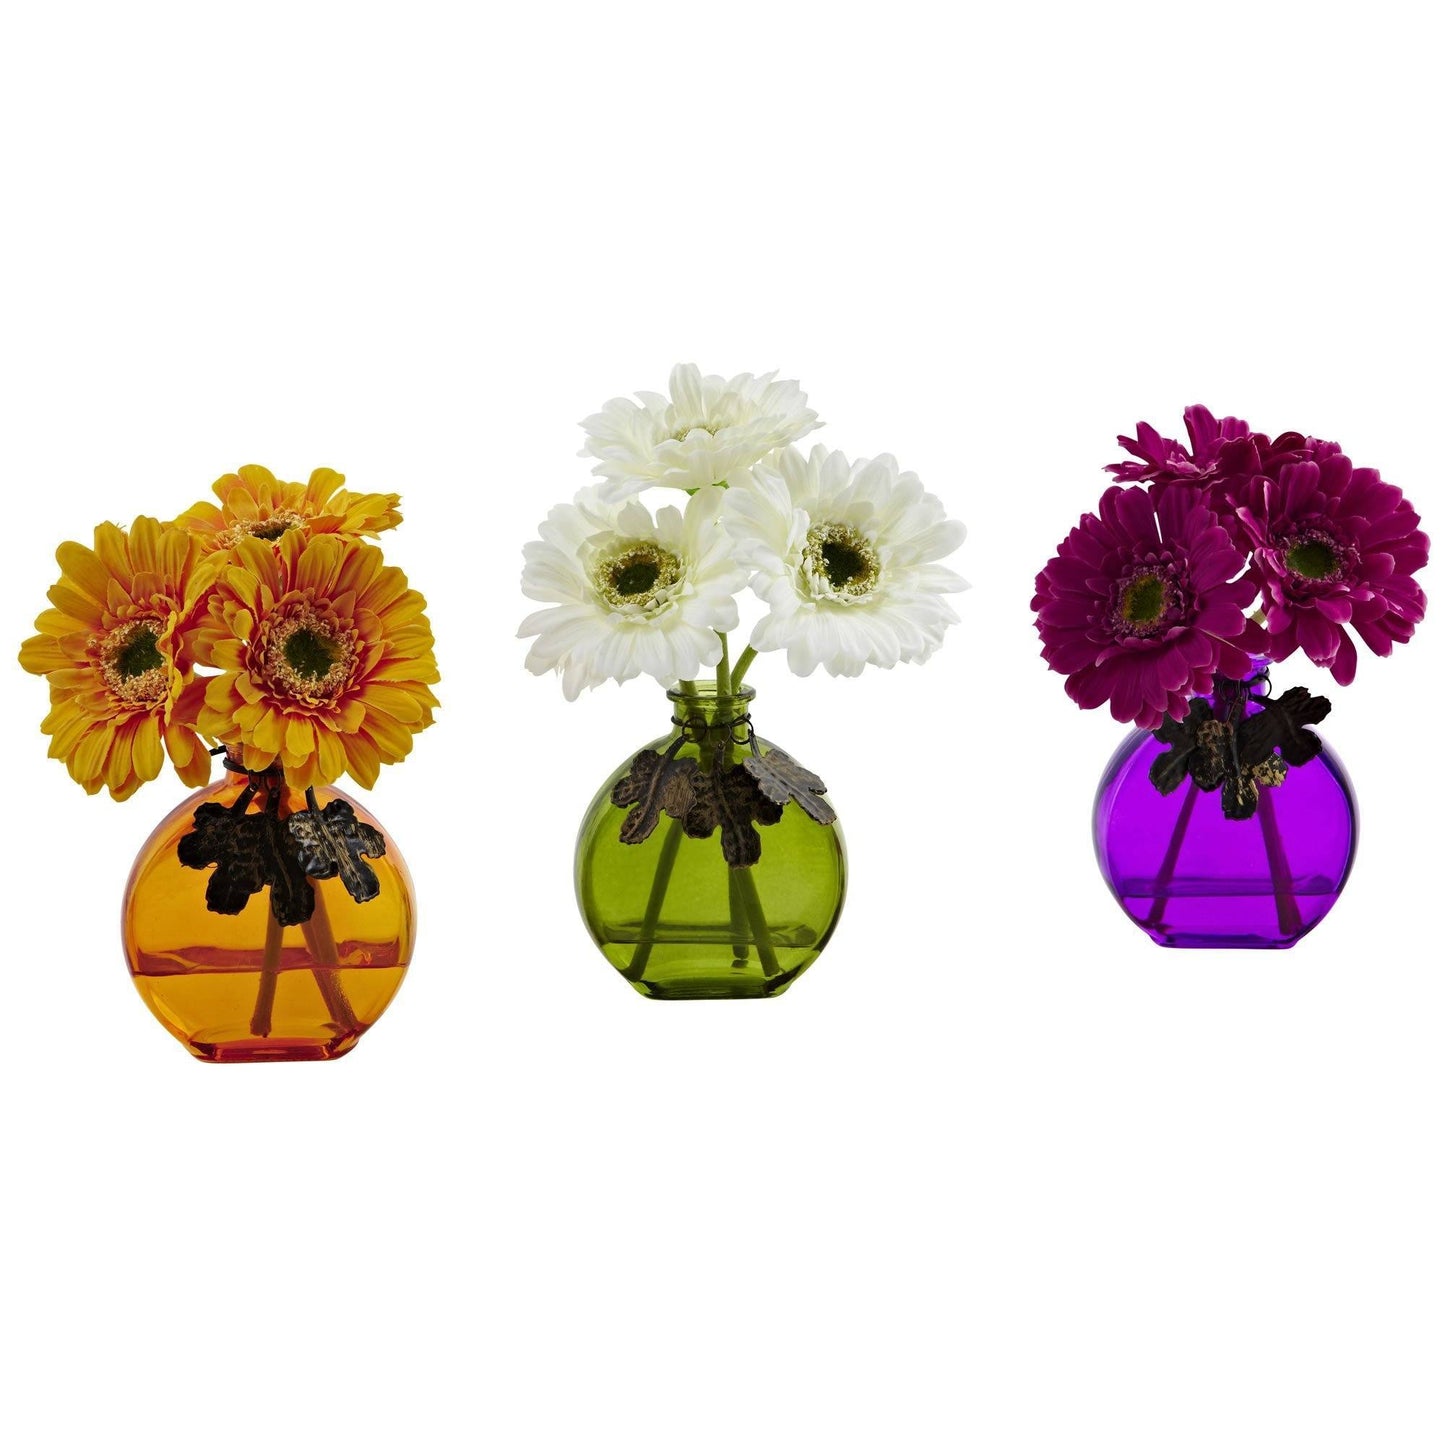 Gerber Daisy w/Colored Vase (Set of 3) by Nearly Natural